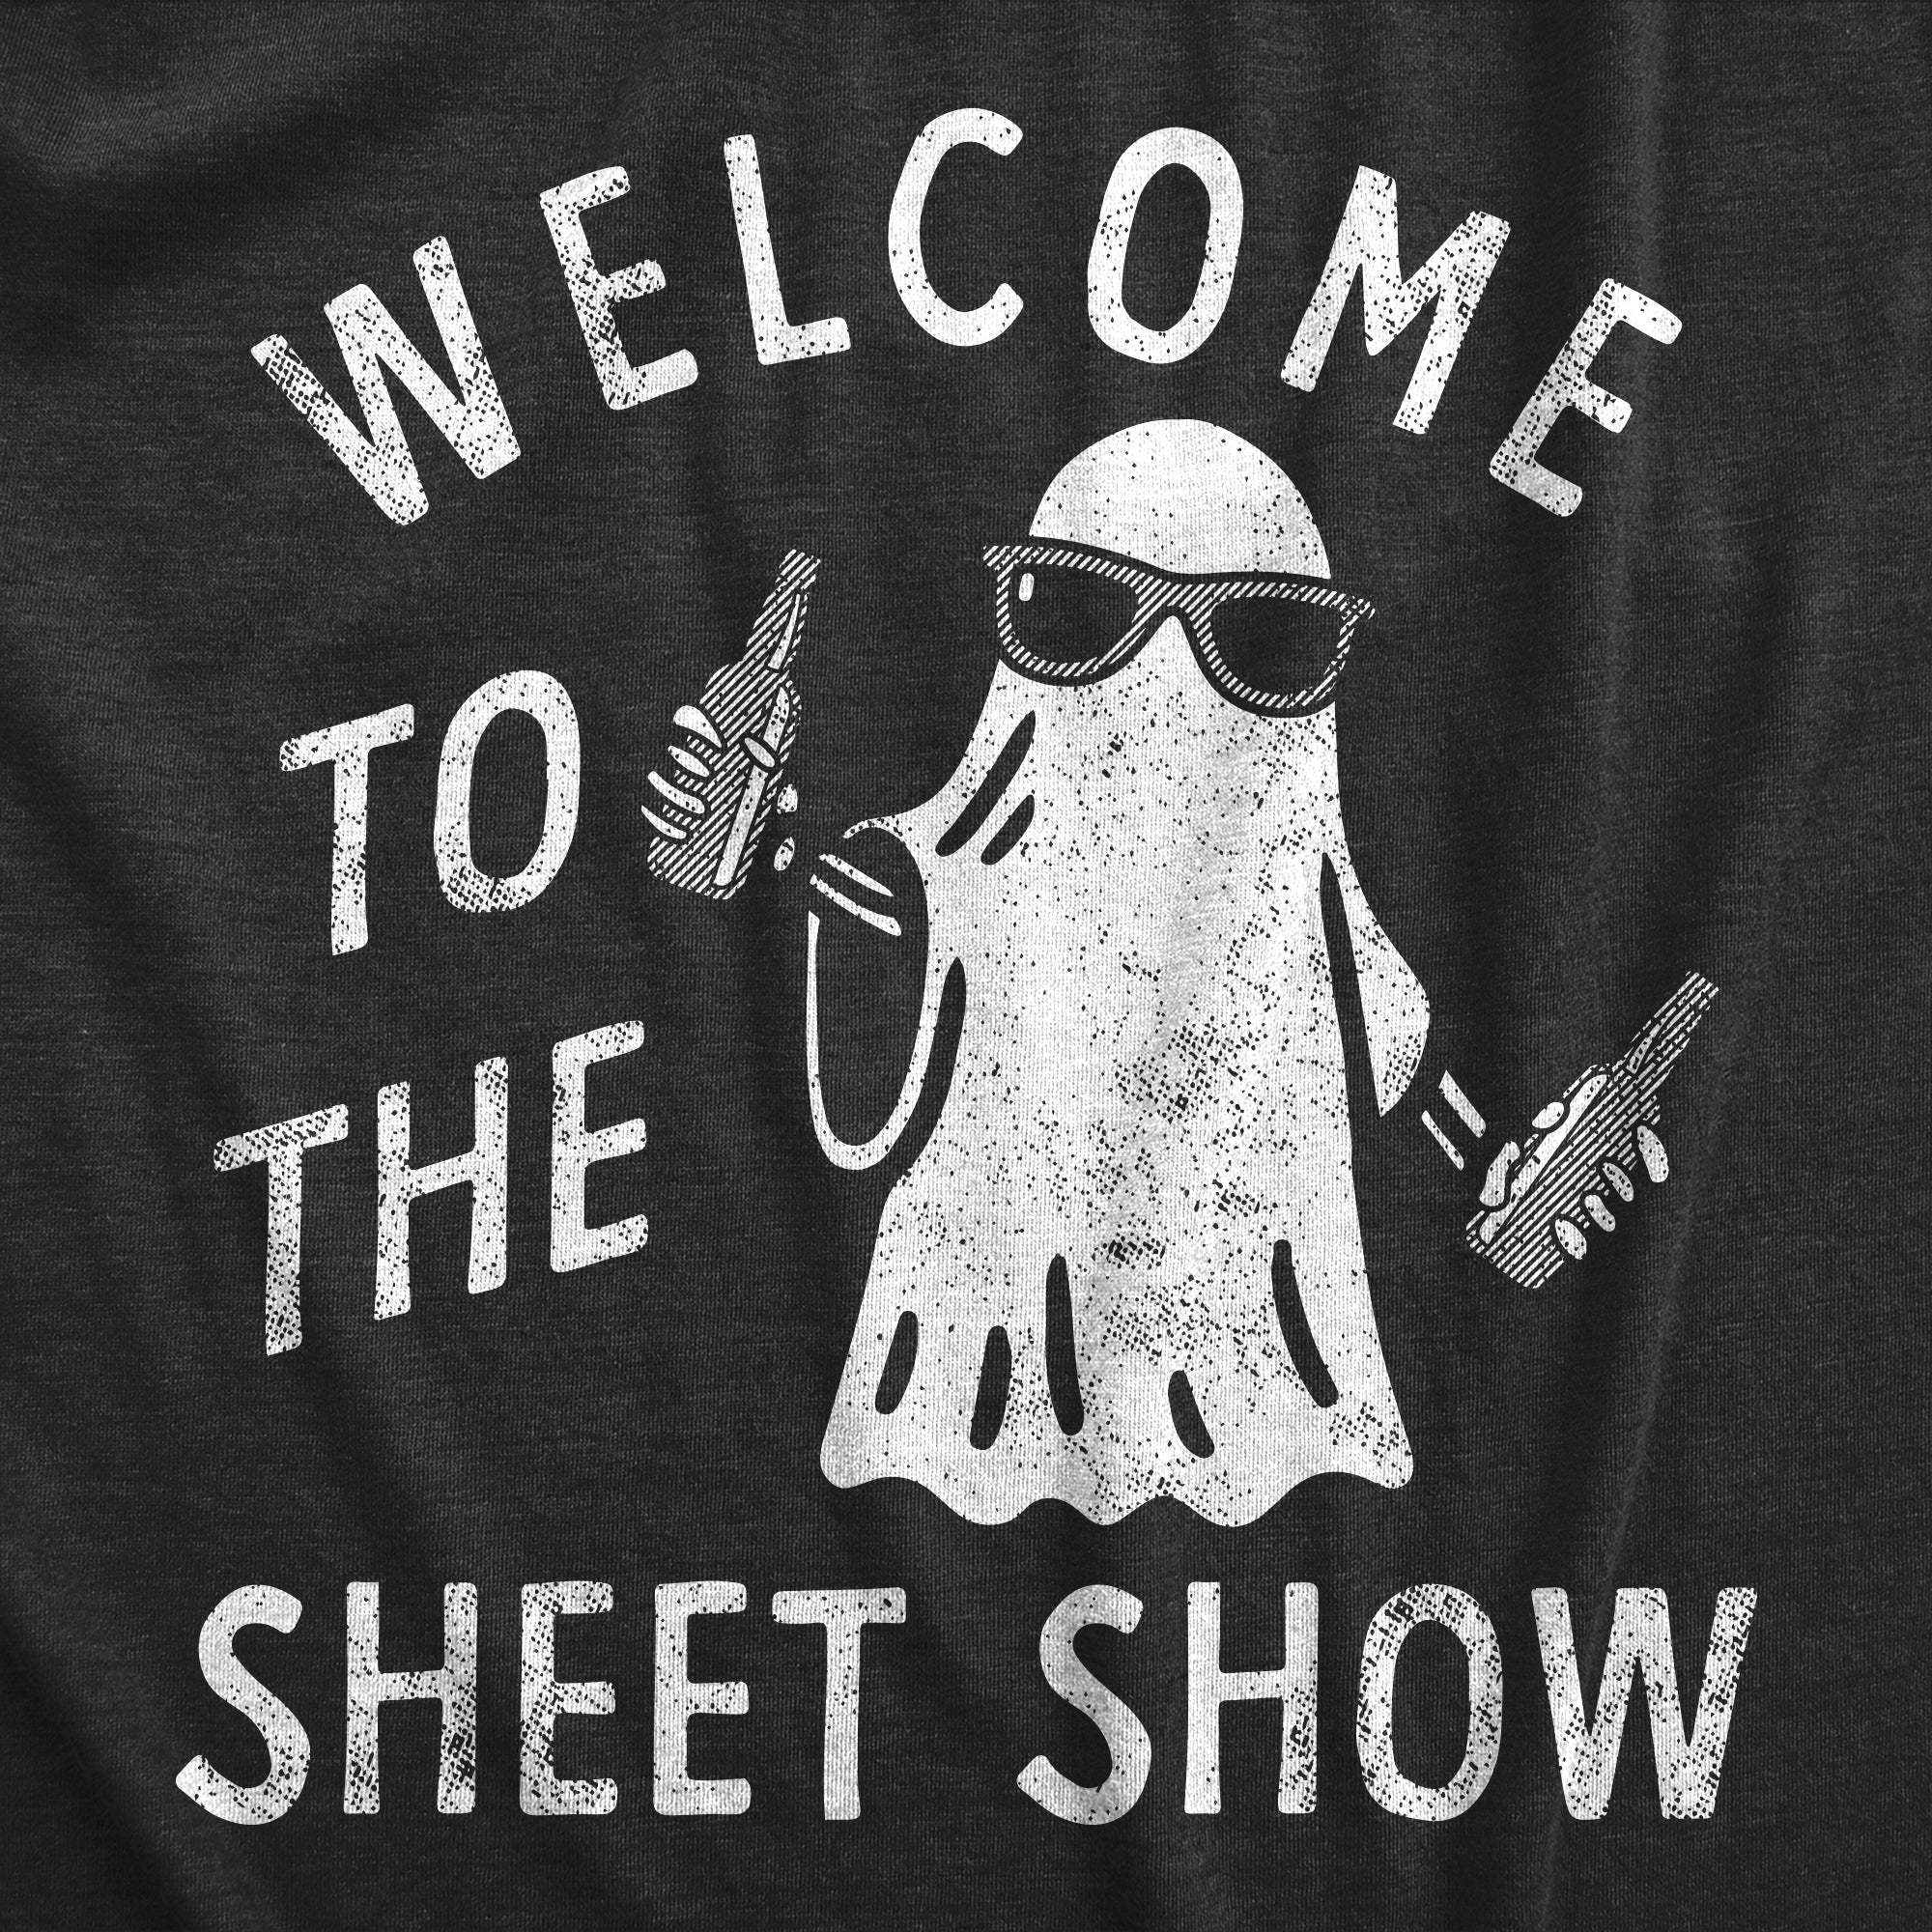 Funny Heather Black - SHEET Welcome To The Sheet Show Womens T Shirt Nerdy Halloween Drinking Tee